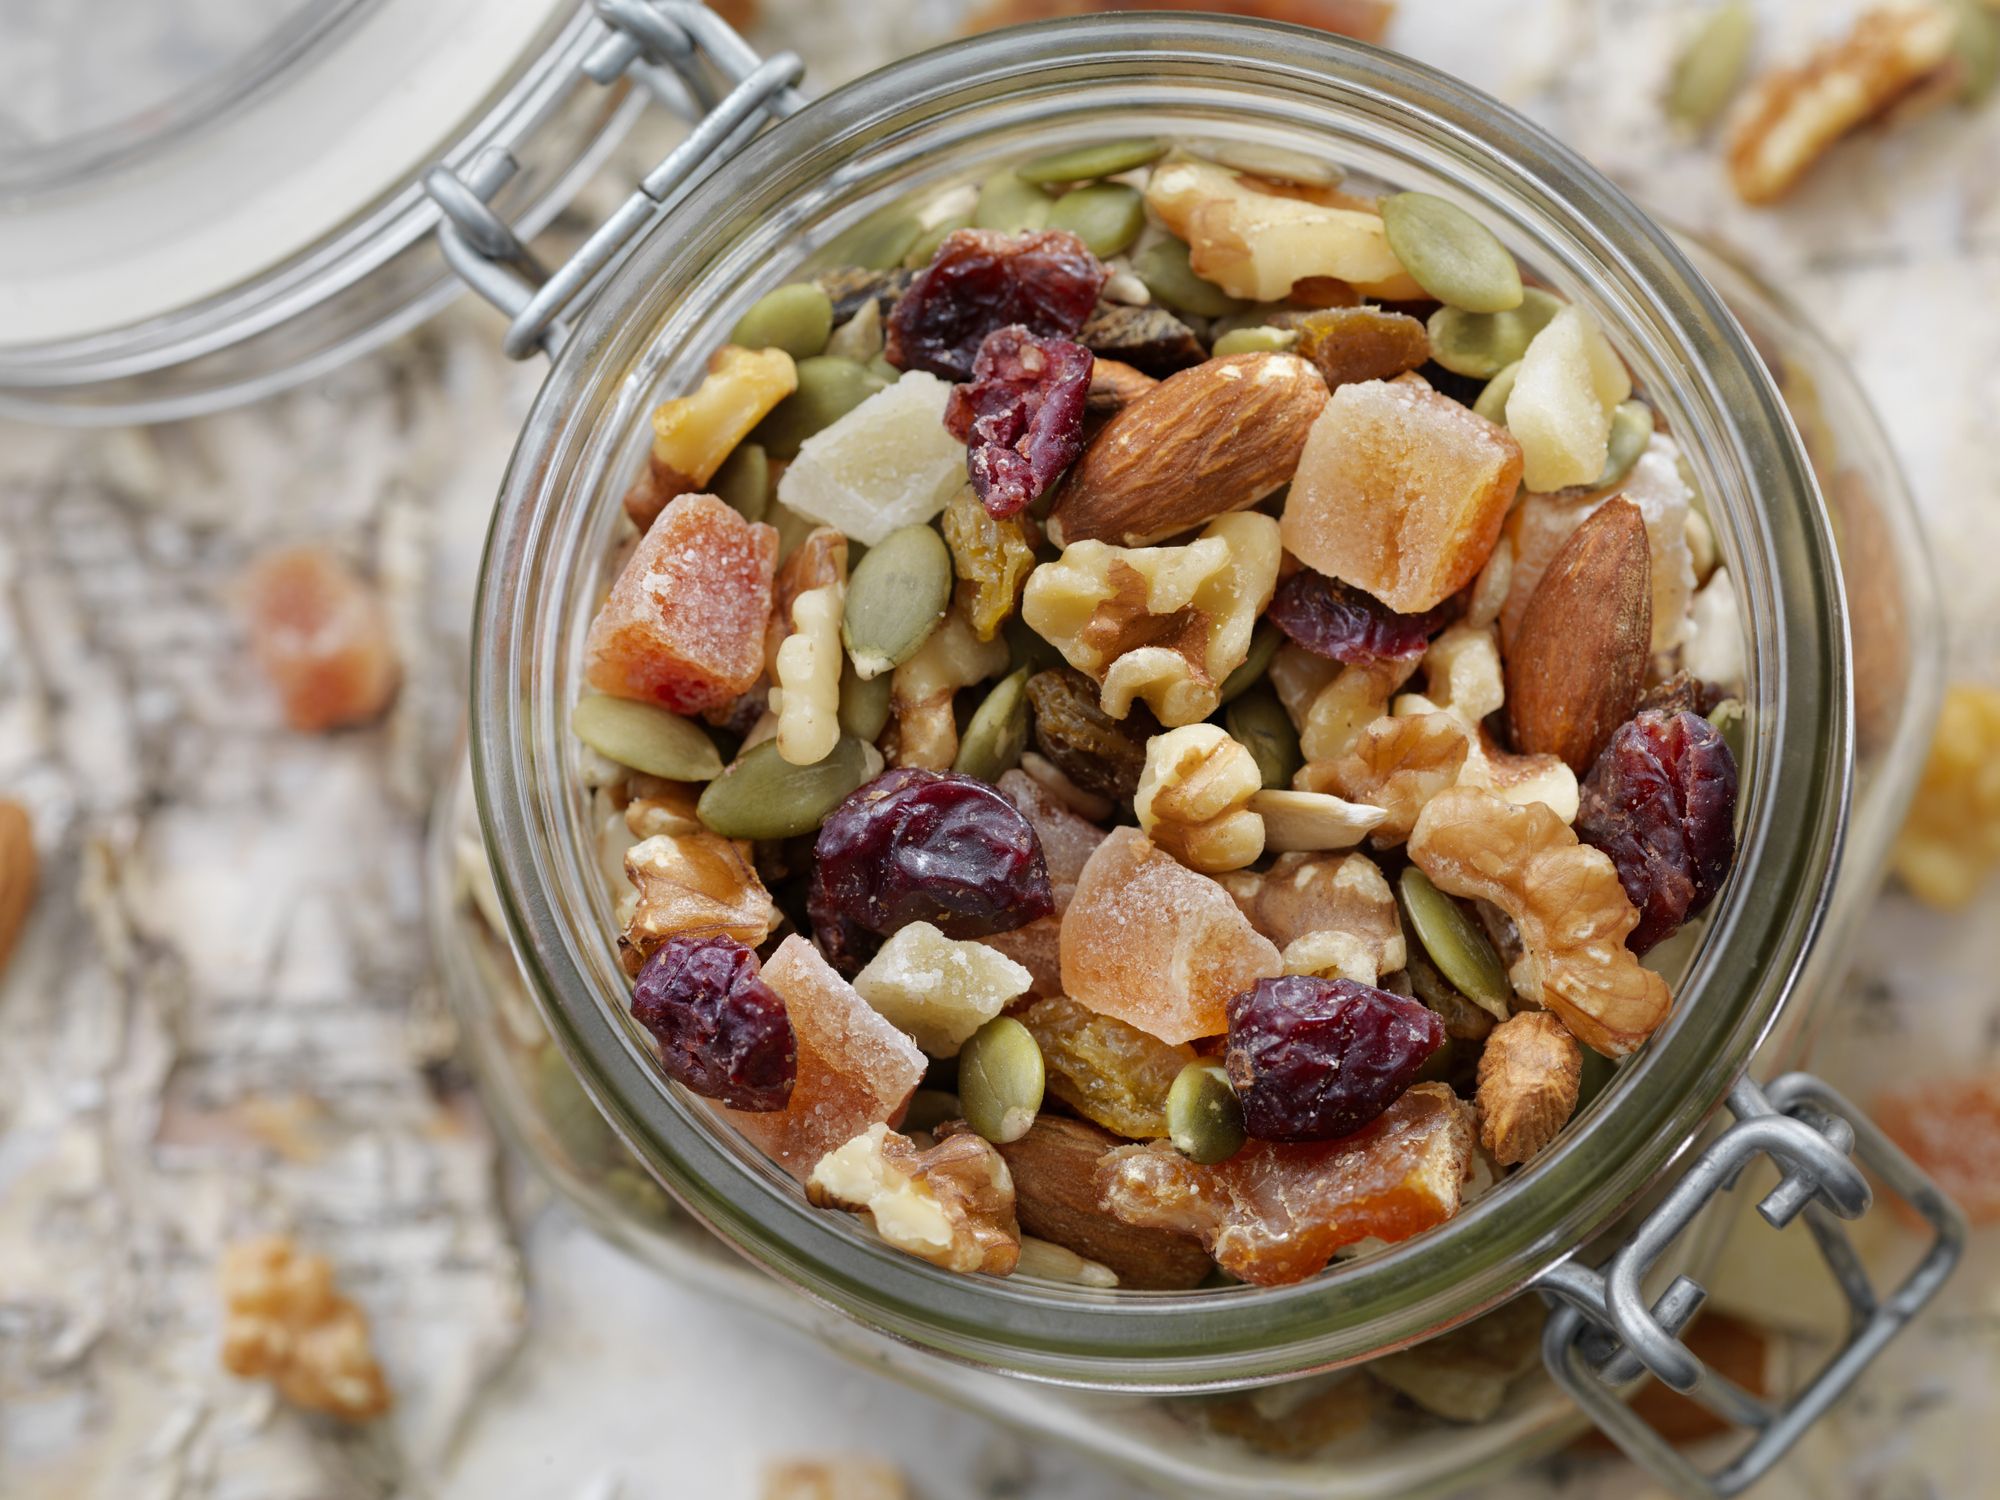 Homemade Nut Free Trail Mix (Perfect For Kids!) - Barefoot In The Pines